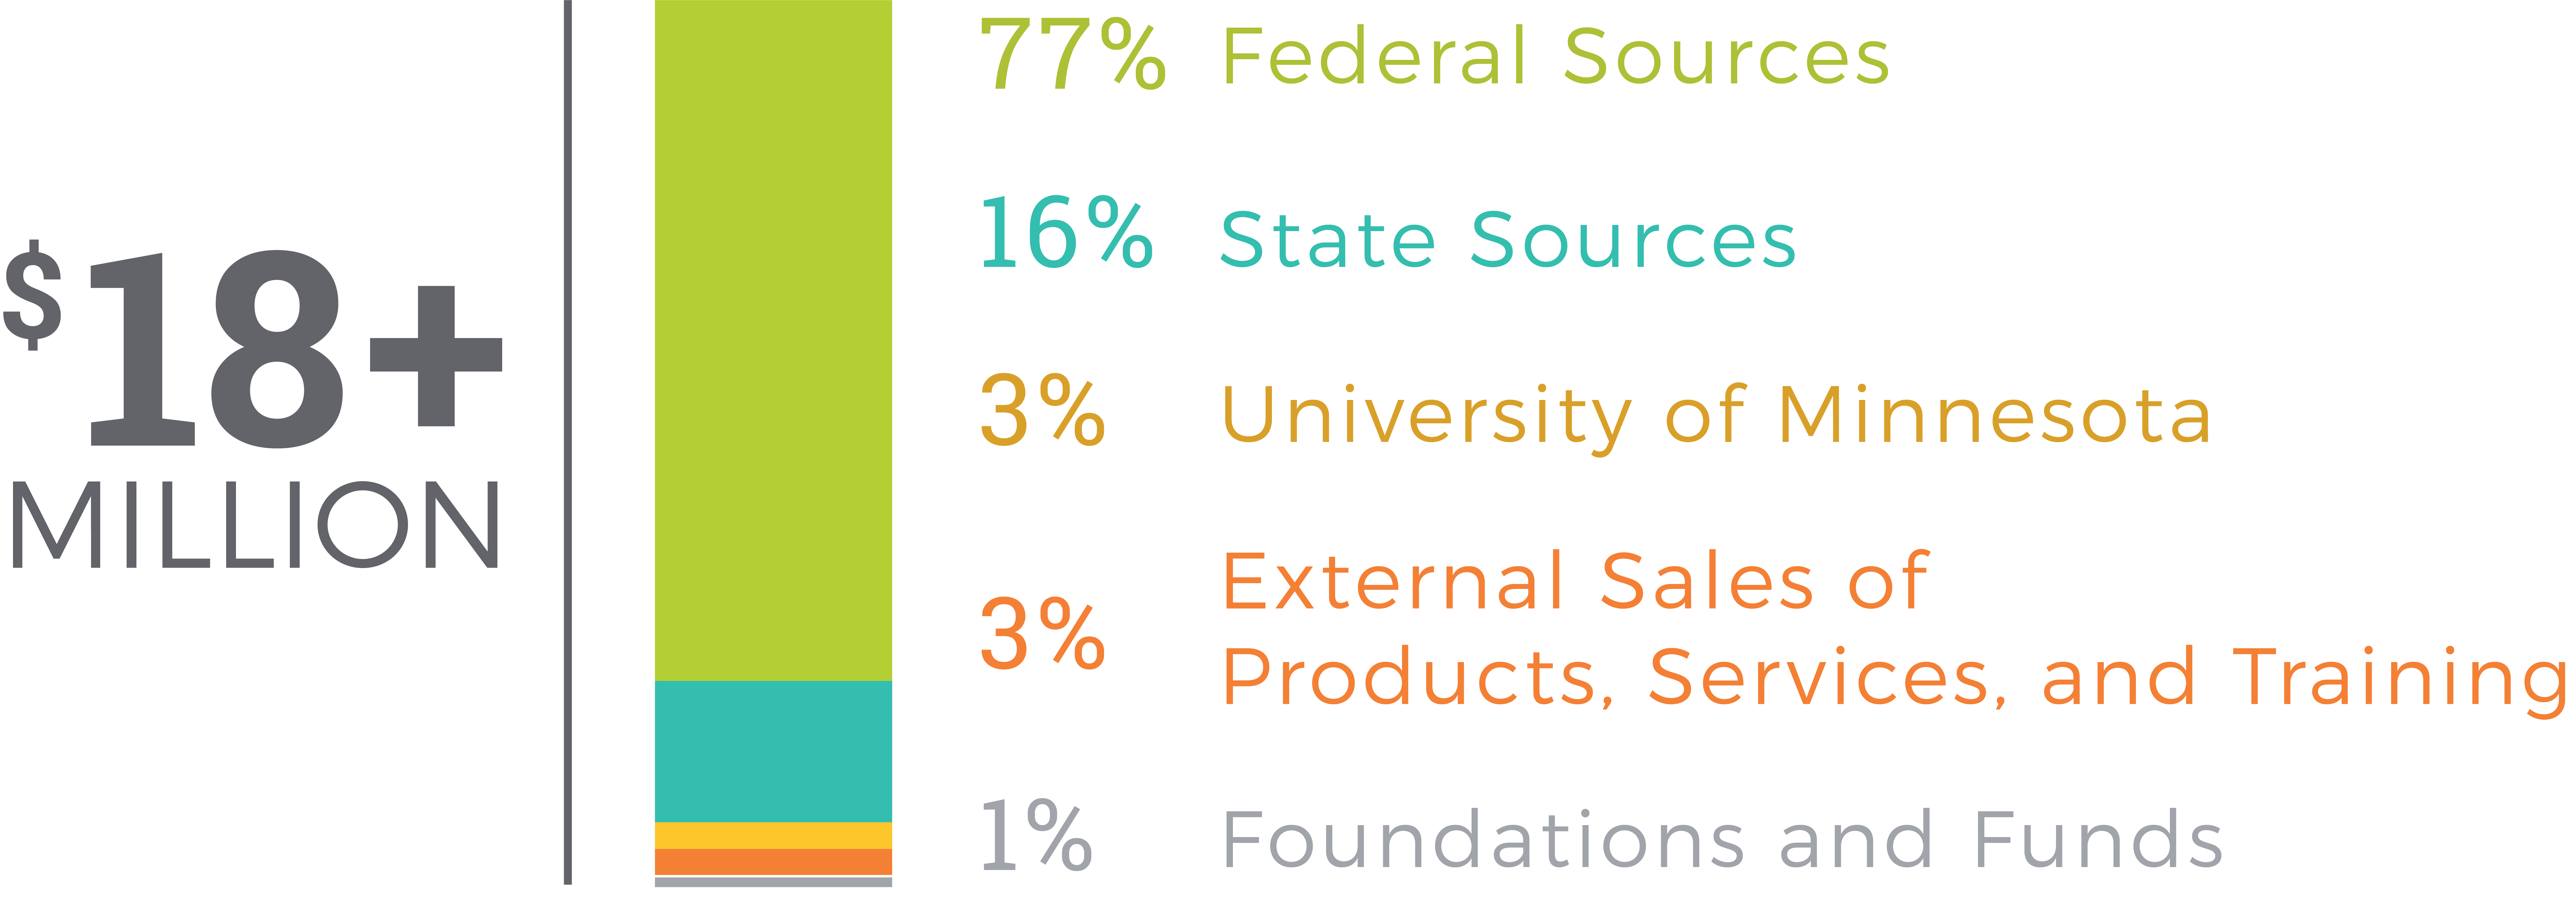 Institute funding (18+ million) breakdown: 77% Federal Sources, 16% State Sources, 3% University of Minnesota, 3% External Sales of Products, Services, and Training, 1% Foundations and Funds